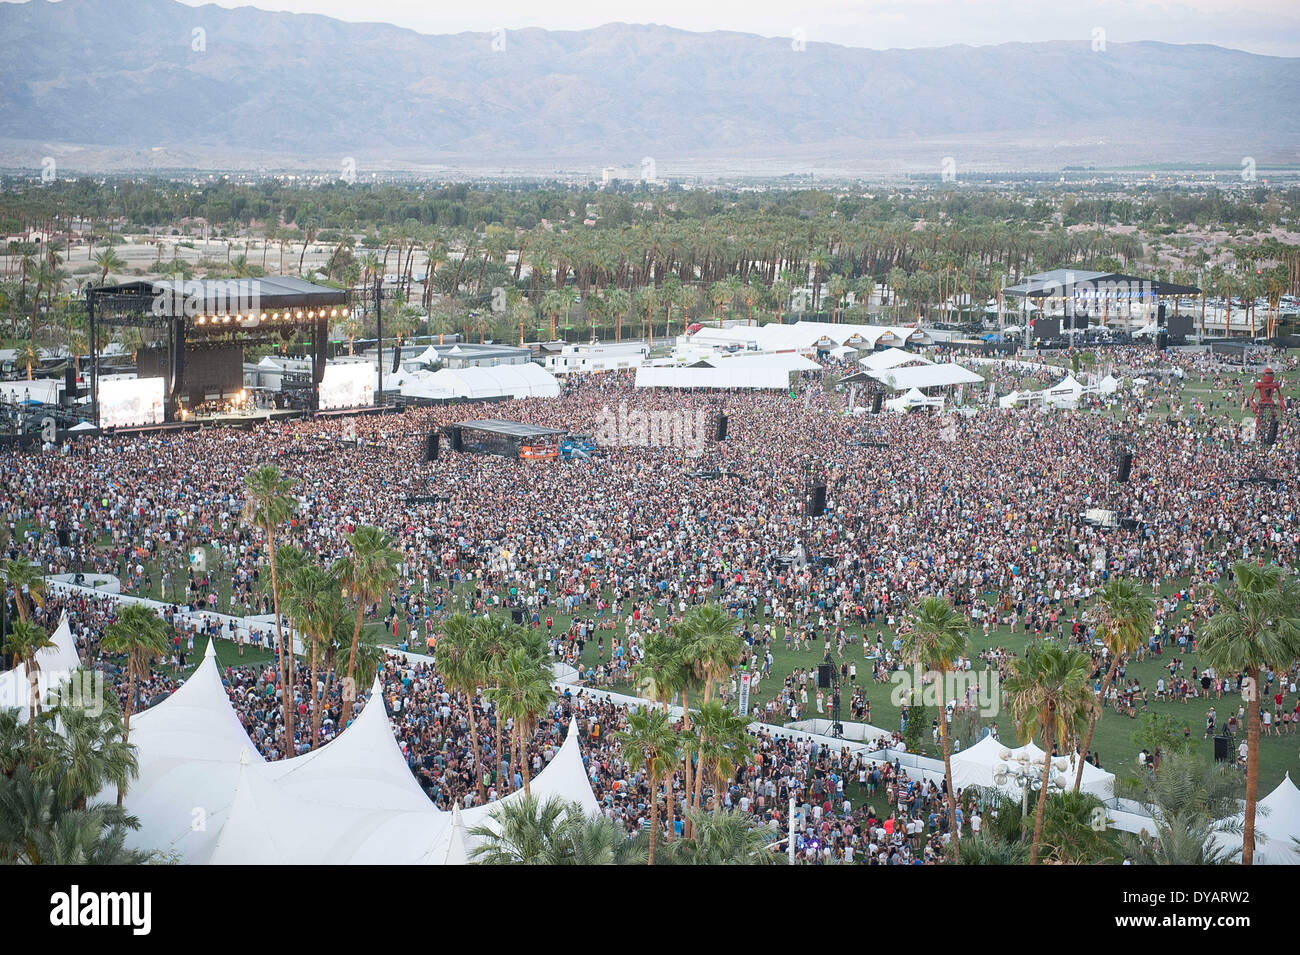 Apr 10, 2014 - Indio, California; USA - General Atmosphere of the 2014  Coachella Music & Arts Festival that is taking place at the Empire Polo  Field. The three day festival will